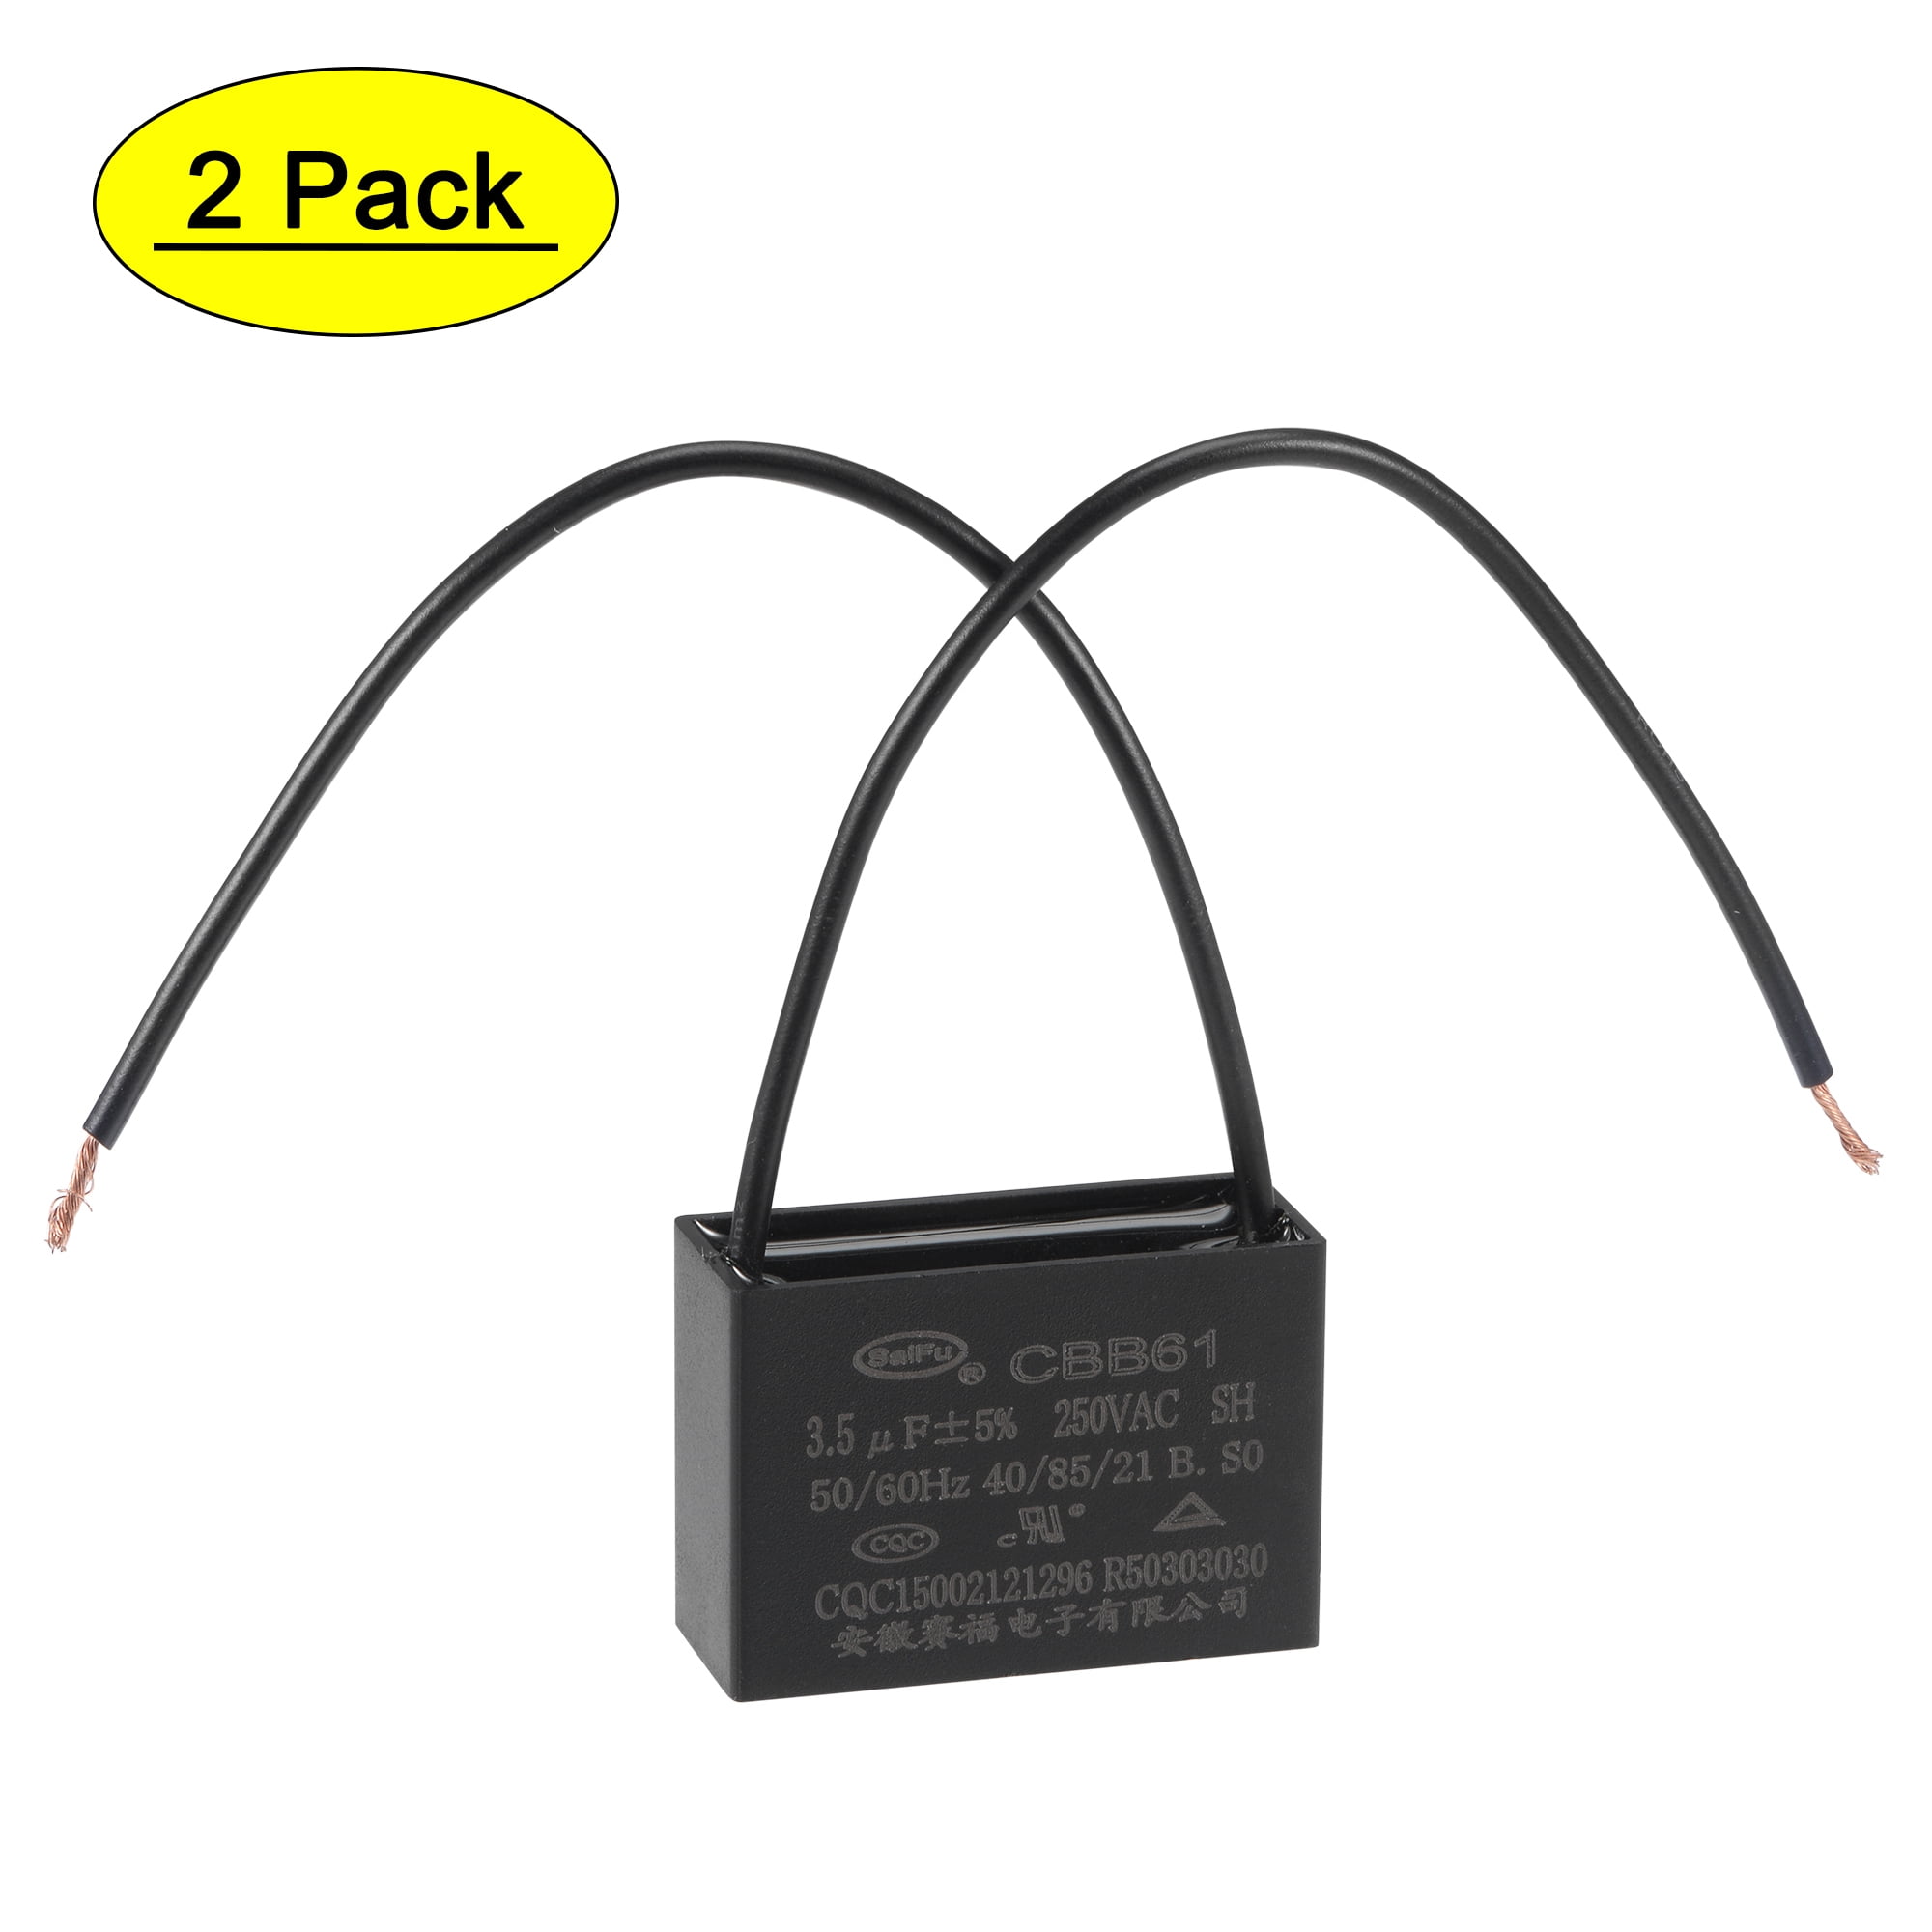 uxcell CBB61 Run Capacitor 450V AC 18uF 2 Cable Metallized Polypropylene Film Capacitors for Ceiling Fan 